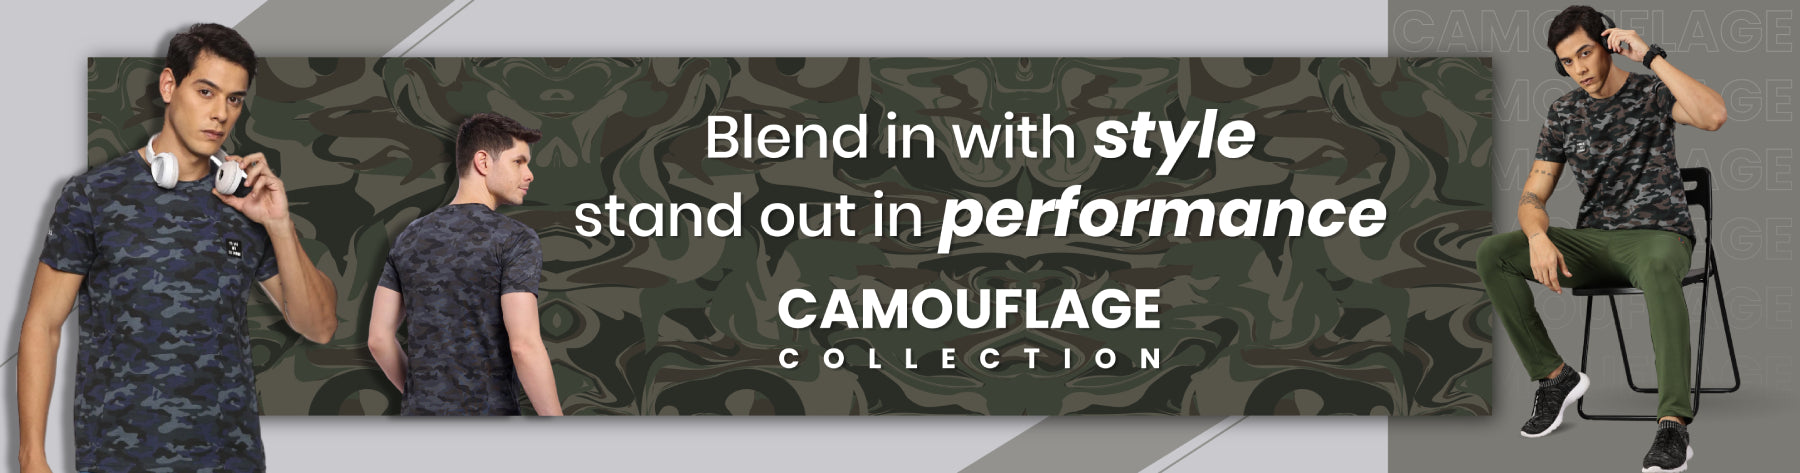 Exclusive Camouflage Collection